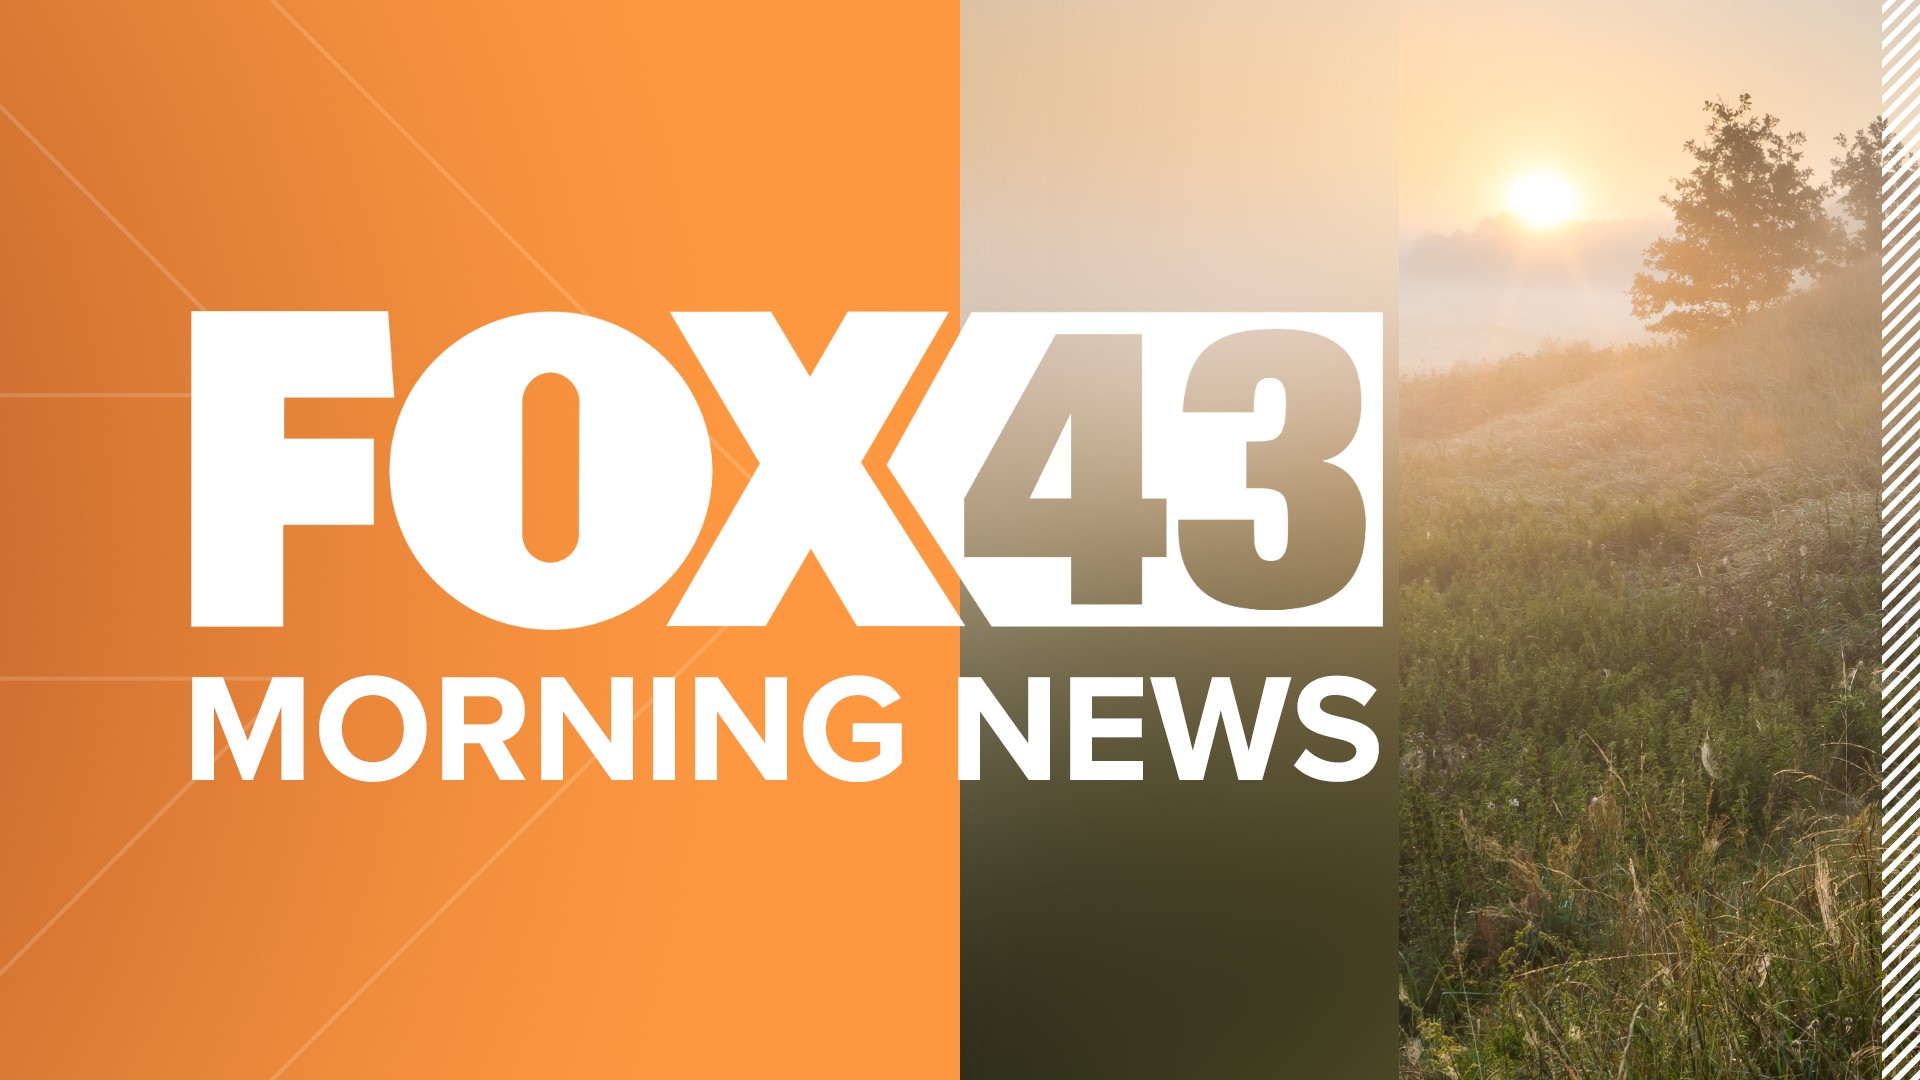 The local morning news that wakes up with you! FOX43 Morning News is here to help start your day no matter when your day starts.